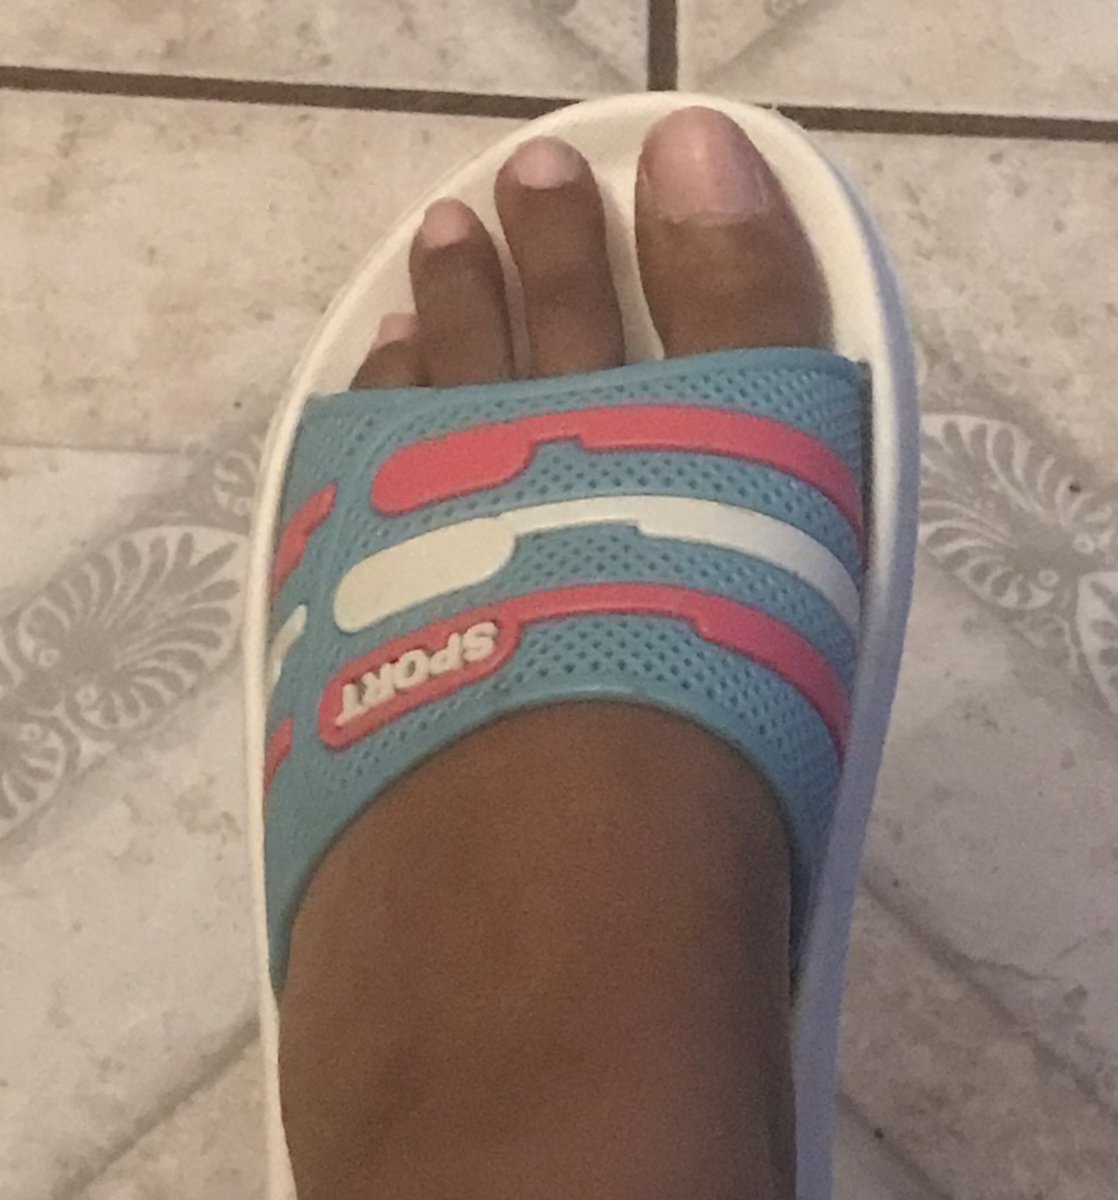 I got new sandals, mom gifted me these cause she wasn’t using them at all. Wonder what the colors remind you of?